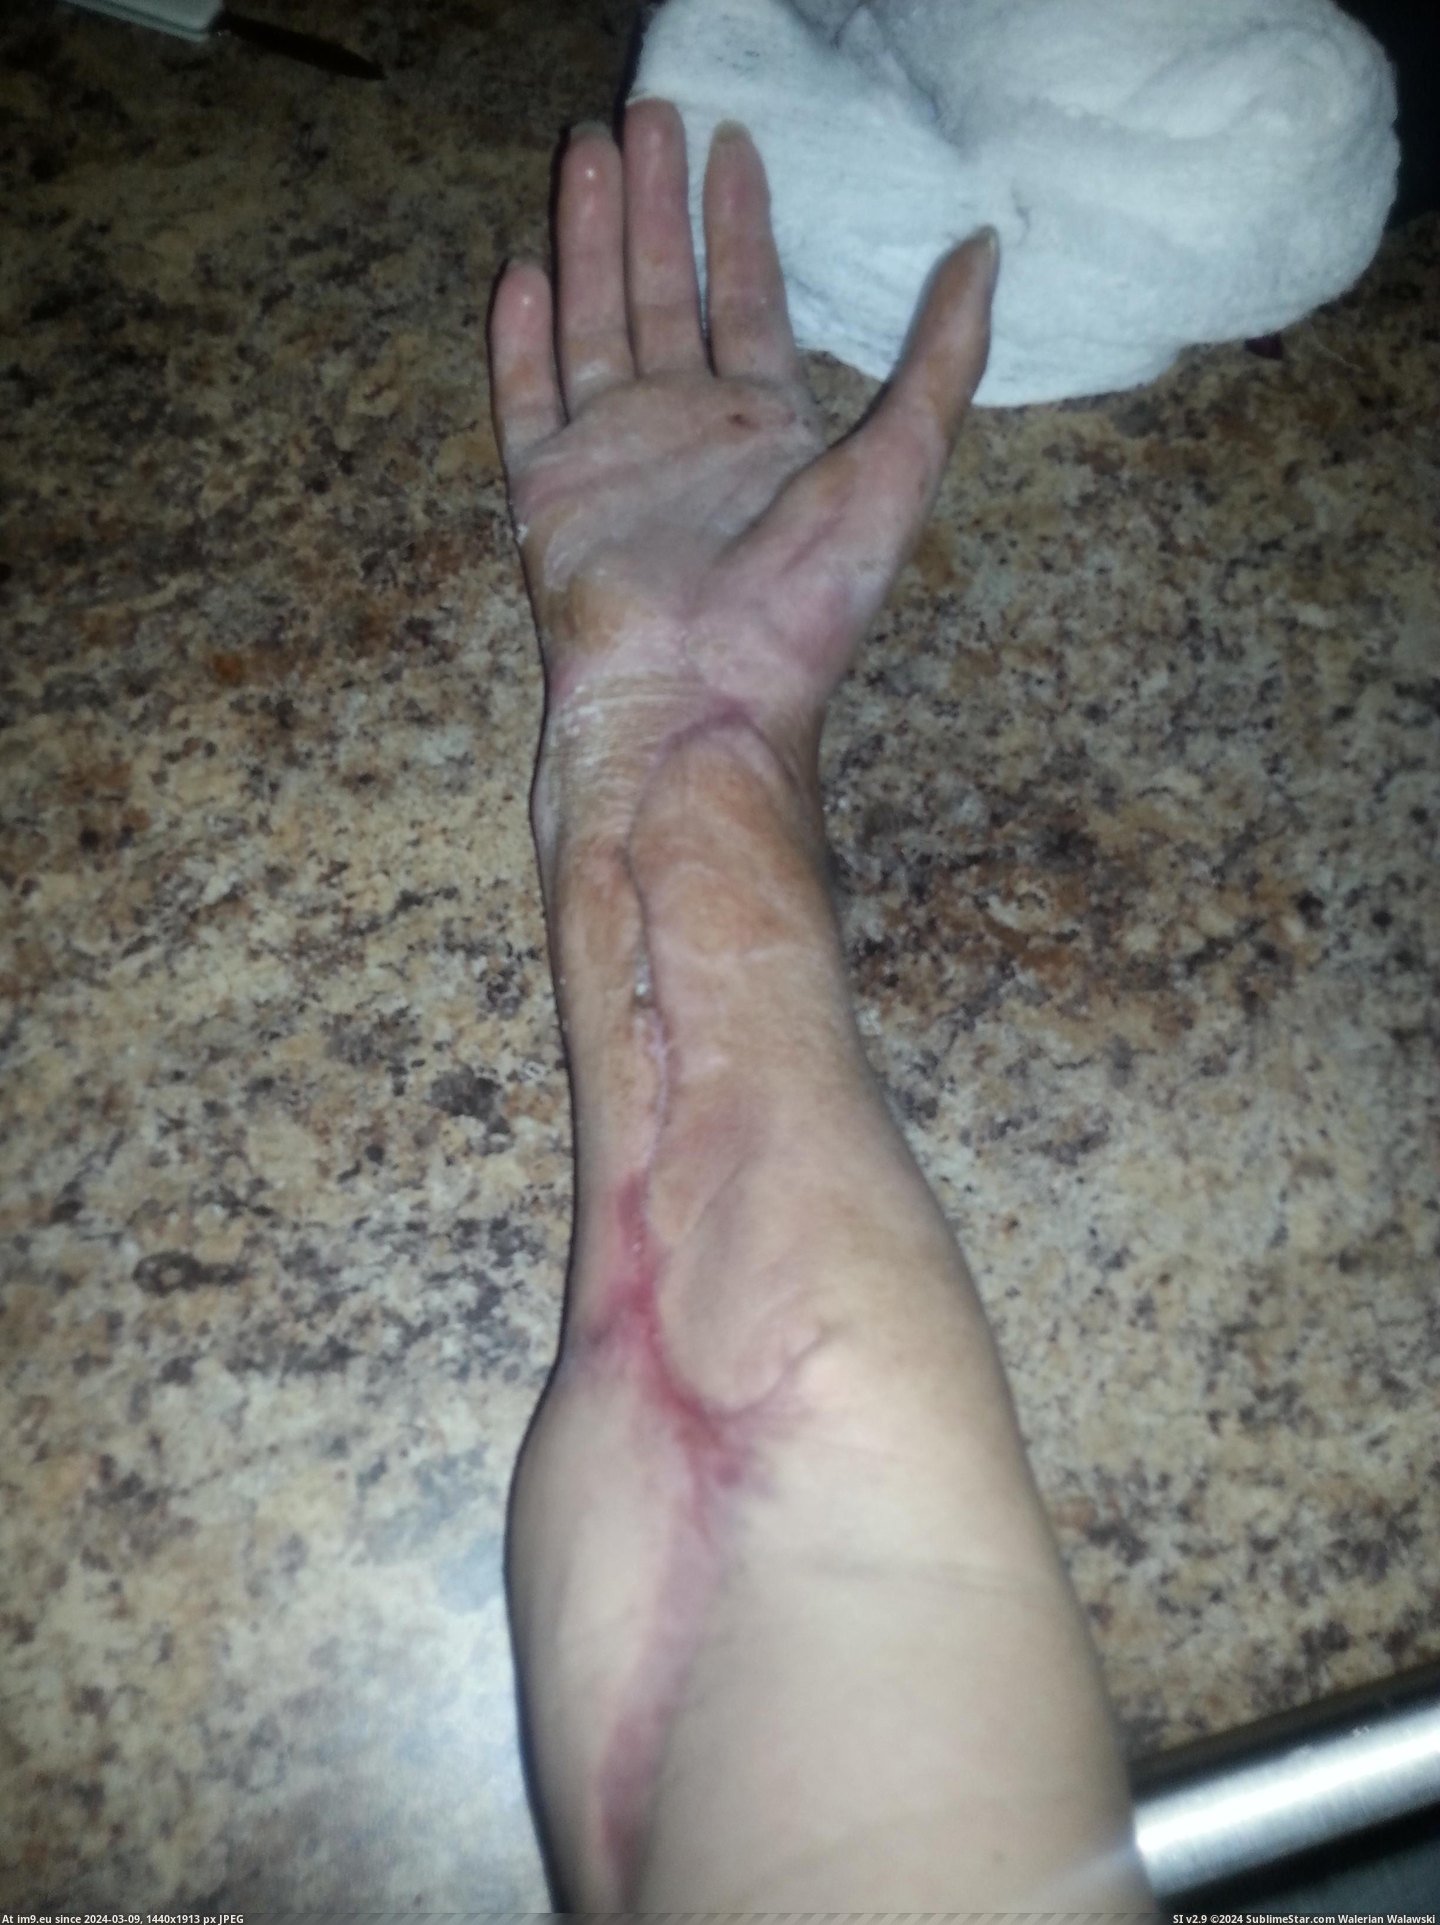 #Wtf #Photos #Guy #Lathe #Remeber #Arm #Ripped #Progress [Wtf] Remeber the guy whos arm got ripped off in a lathe? Well im back with photos on the progress. 3 Pic. (Image of album My r/WTF favs))